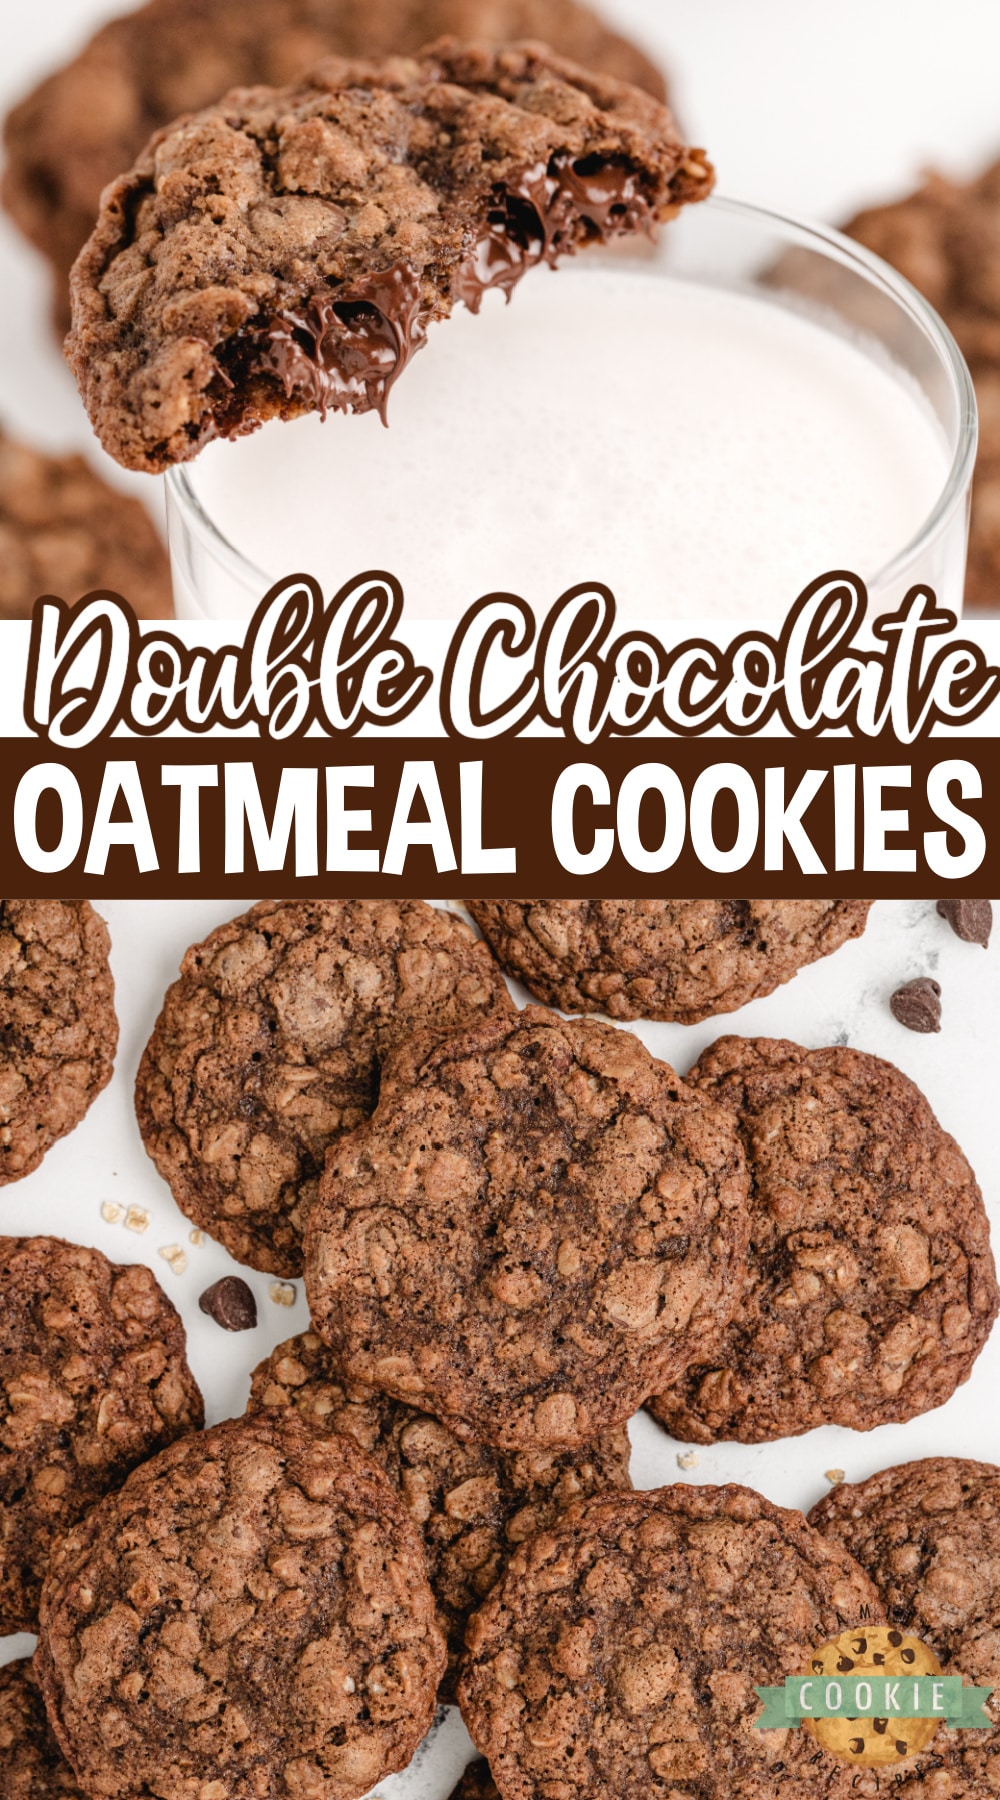 Double Chocolate Oatmeal Cookies are soft, chewy, and packed with chocolate! Chocolate cookie recipe packed with oats and chocolate chips.